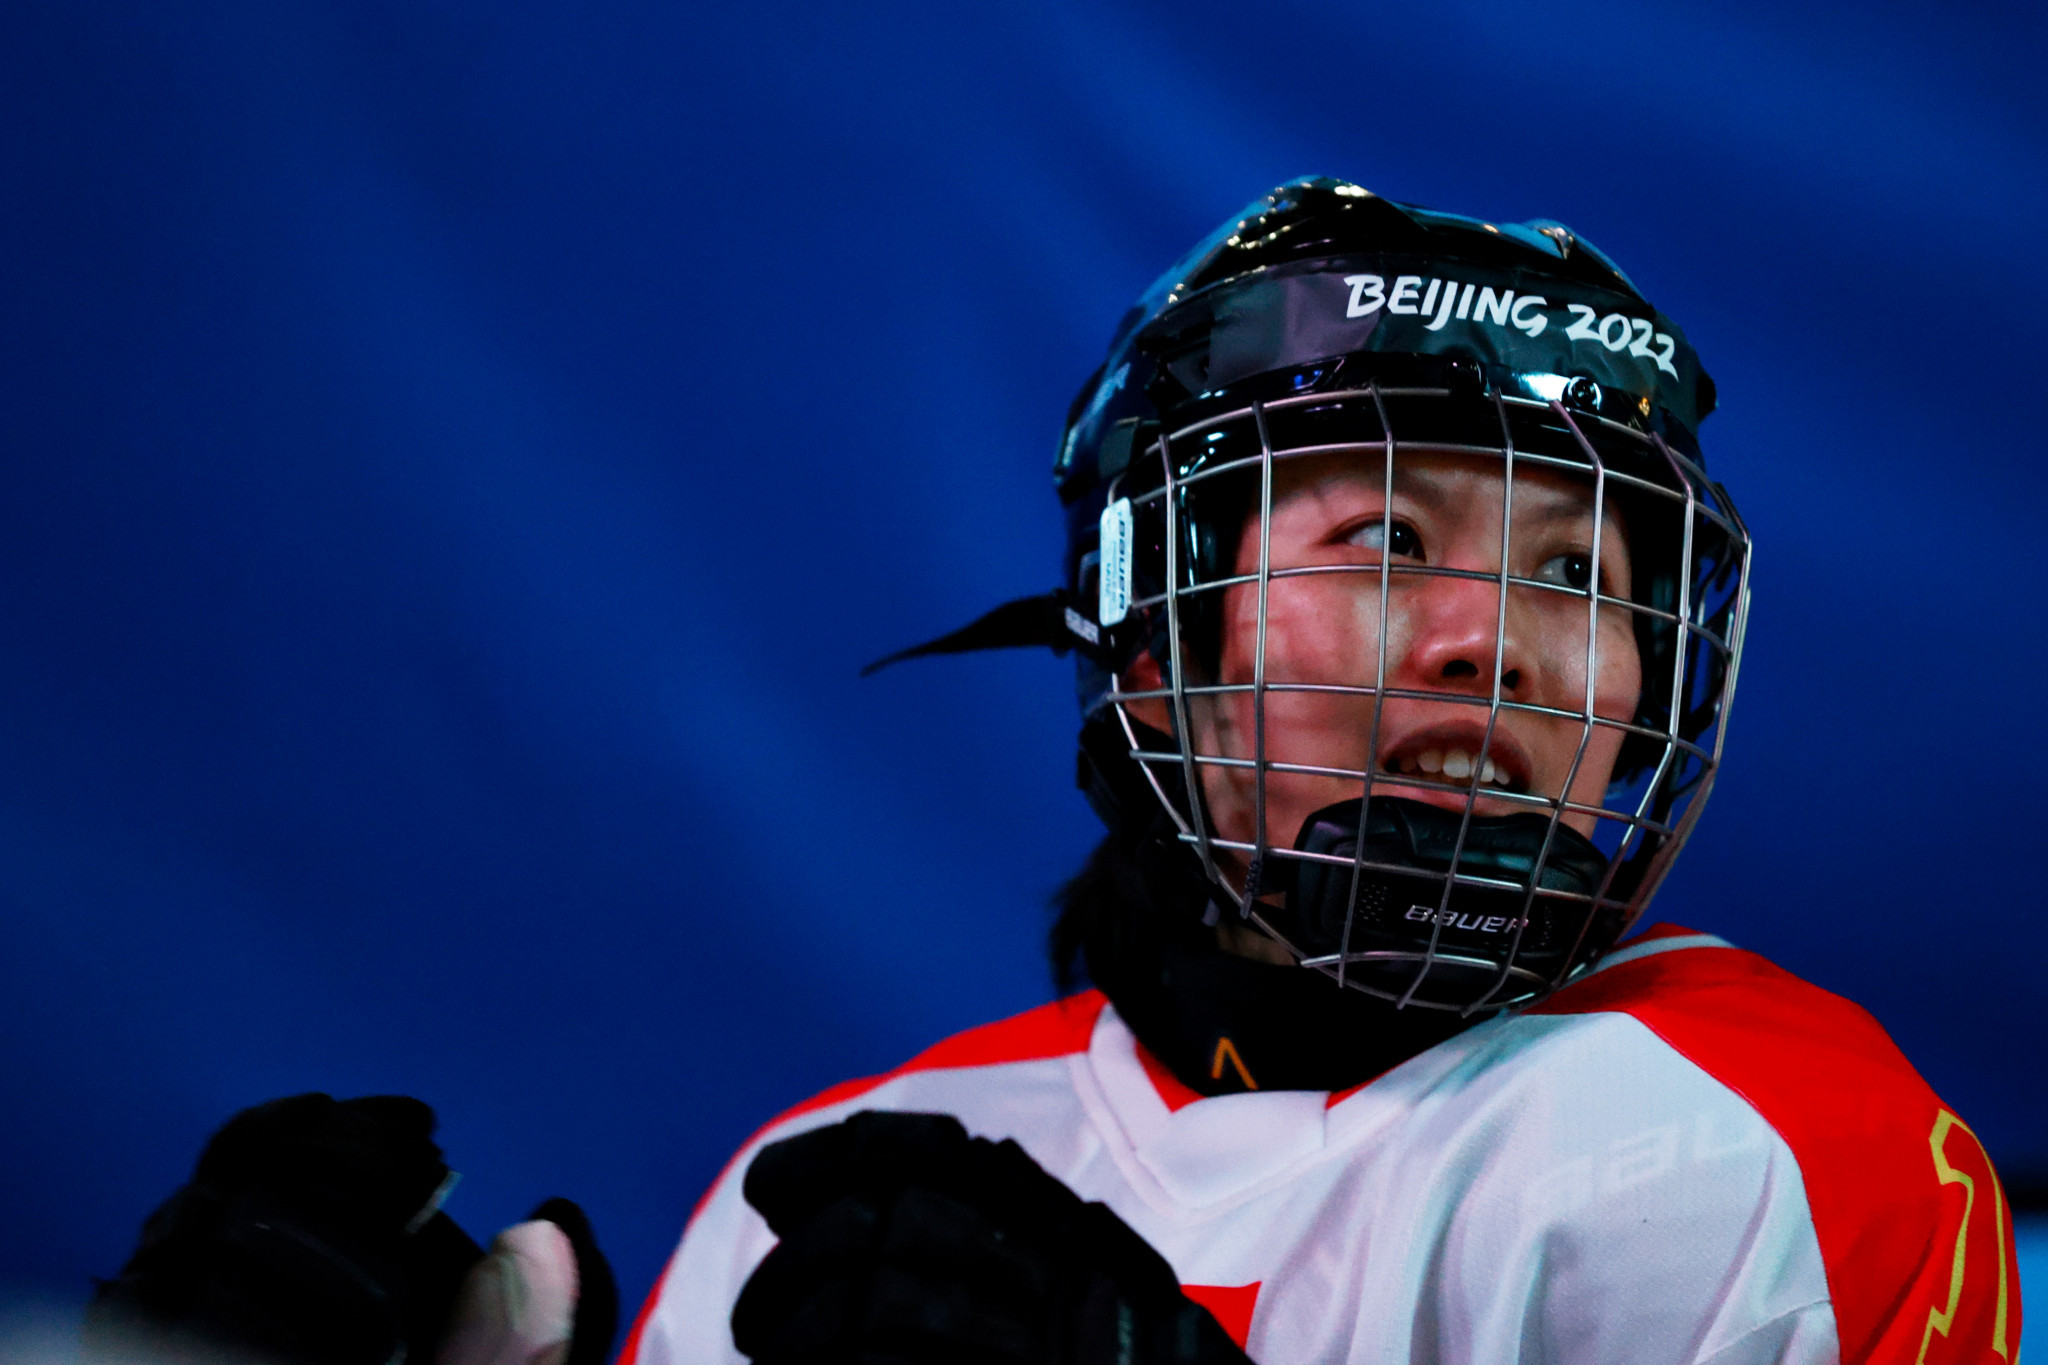 Yu Jing is only the third woman to appear in ice hockey at the Winter Paralympic Games ©Getty Images